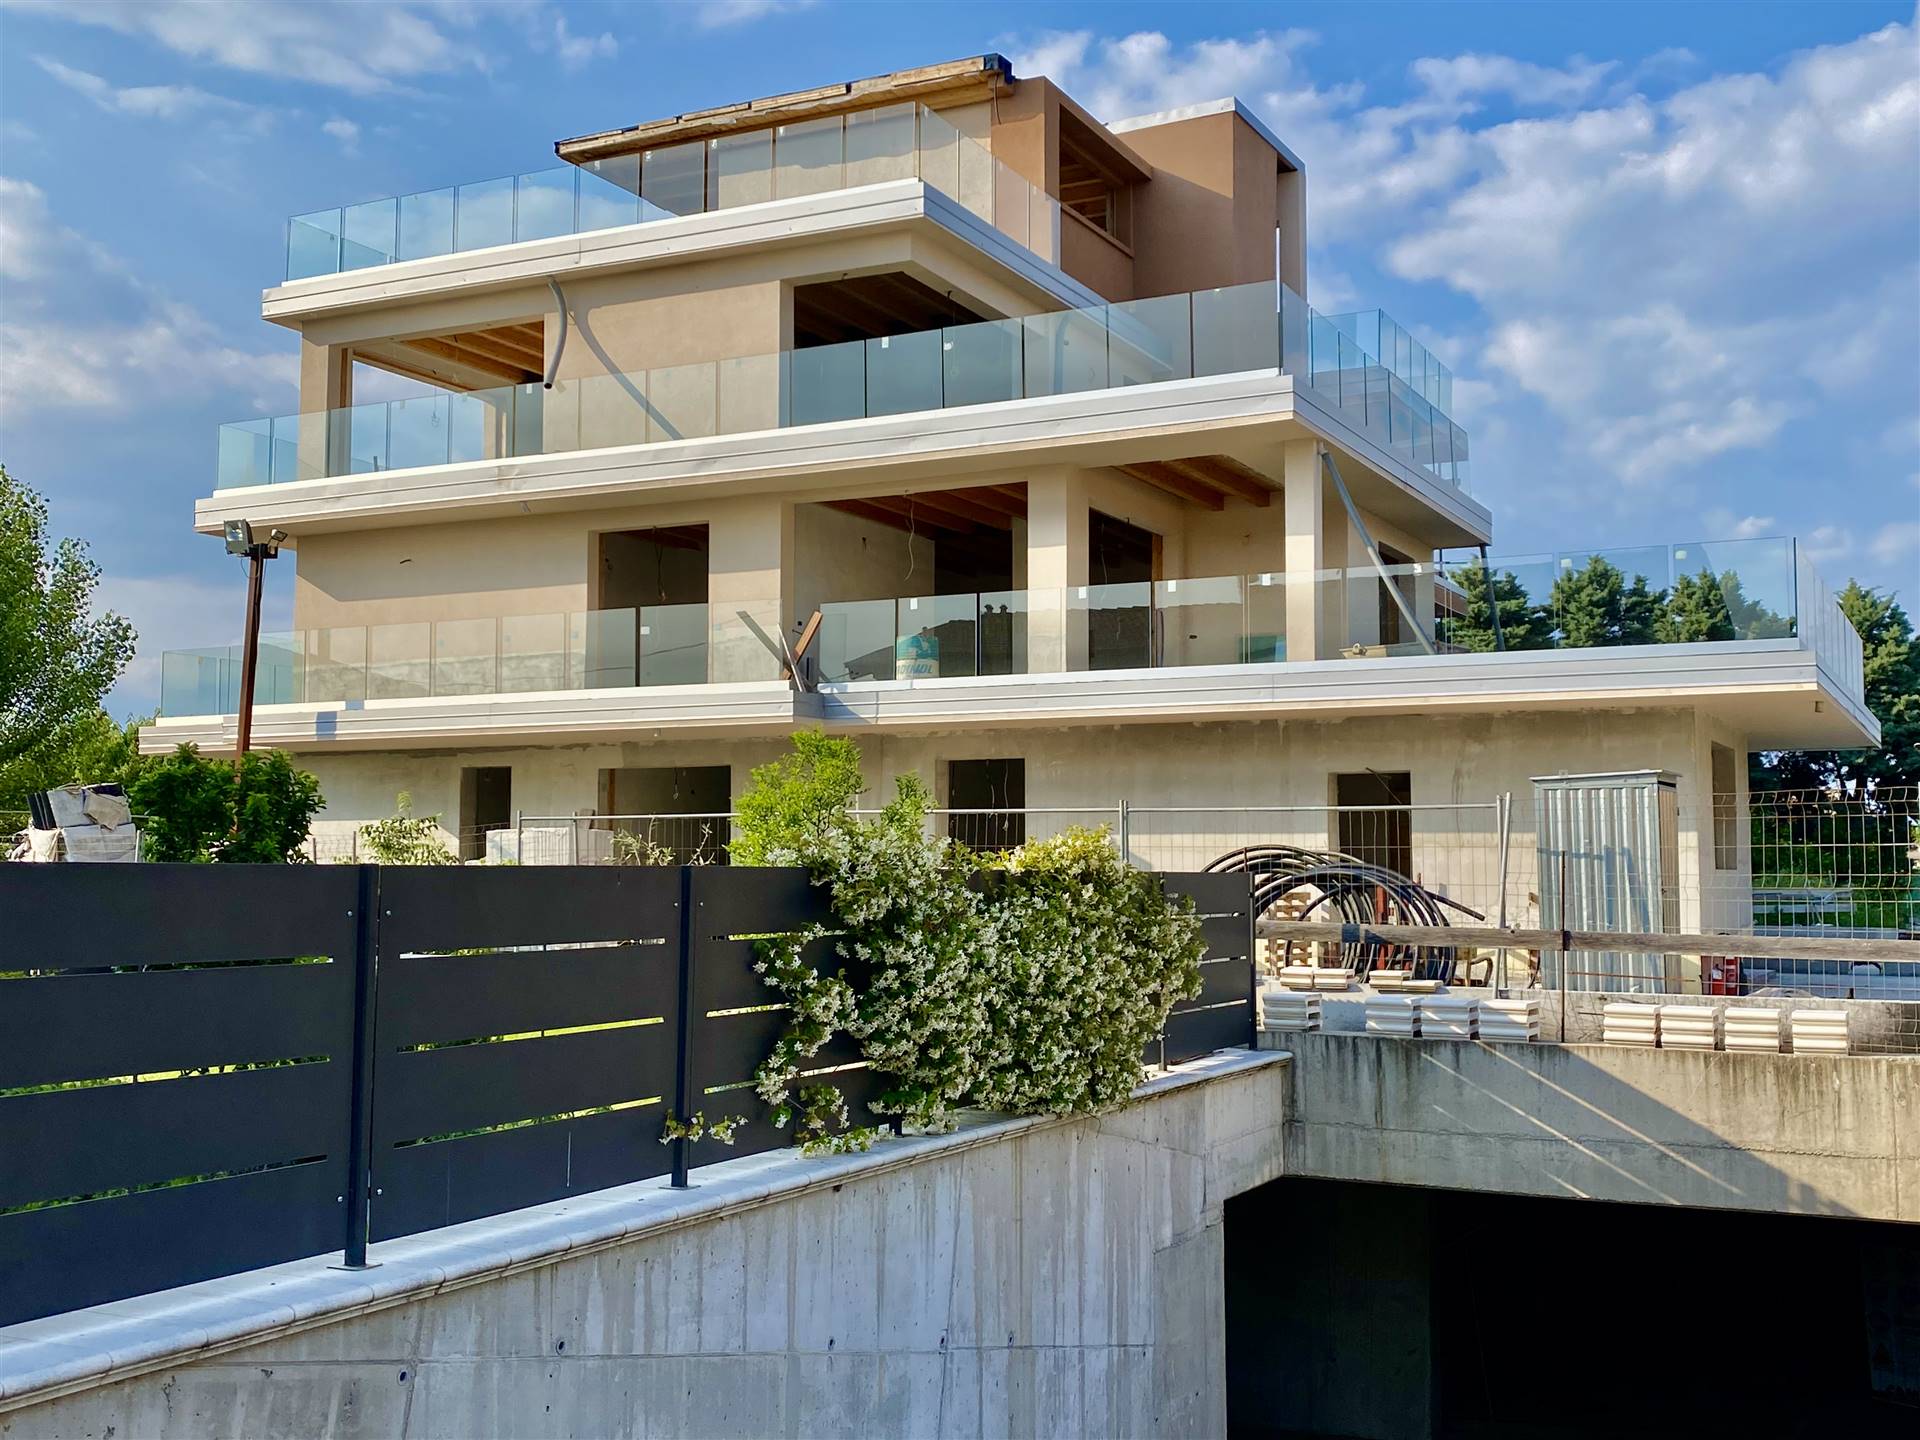 DESENZANO DEL GARDA, Detached apartment for sale of 79 Sq. mt., New construction, Heating Individual heating system, Energetic class: A4, placed at Ground, composed by: 3 Rooms, Kitchenette, , 2 